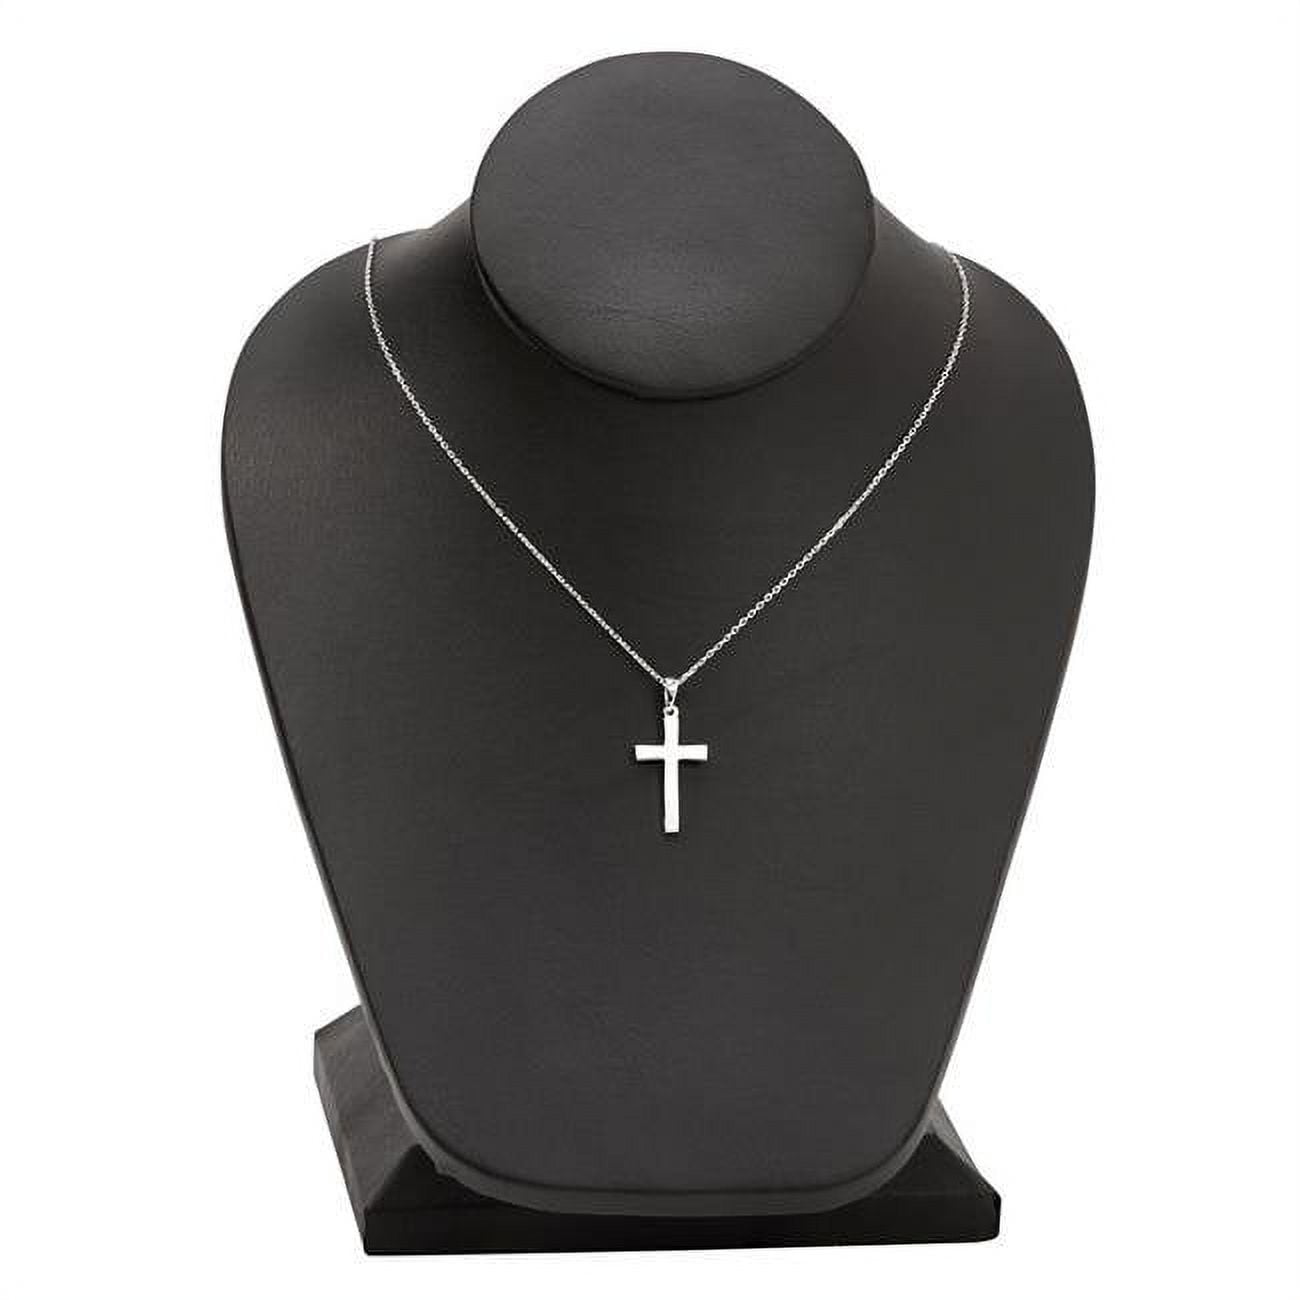 002470 1 X 0.5 In. Sterling Silver Cross Necklace With 18 In. Chain